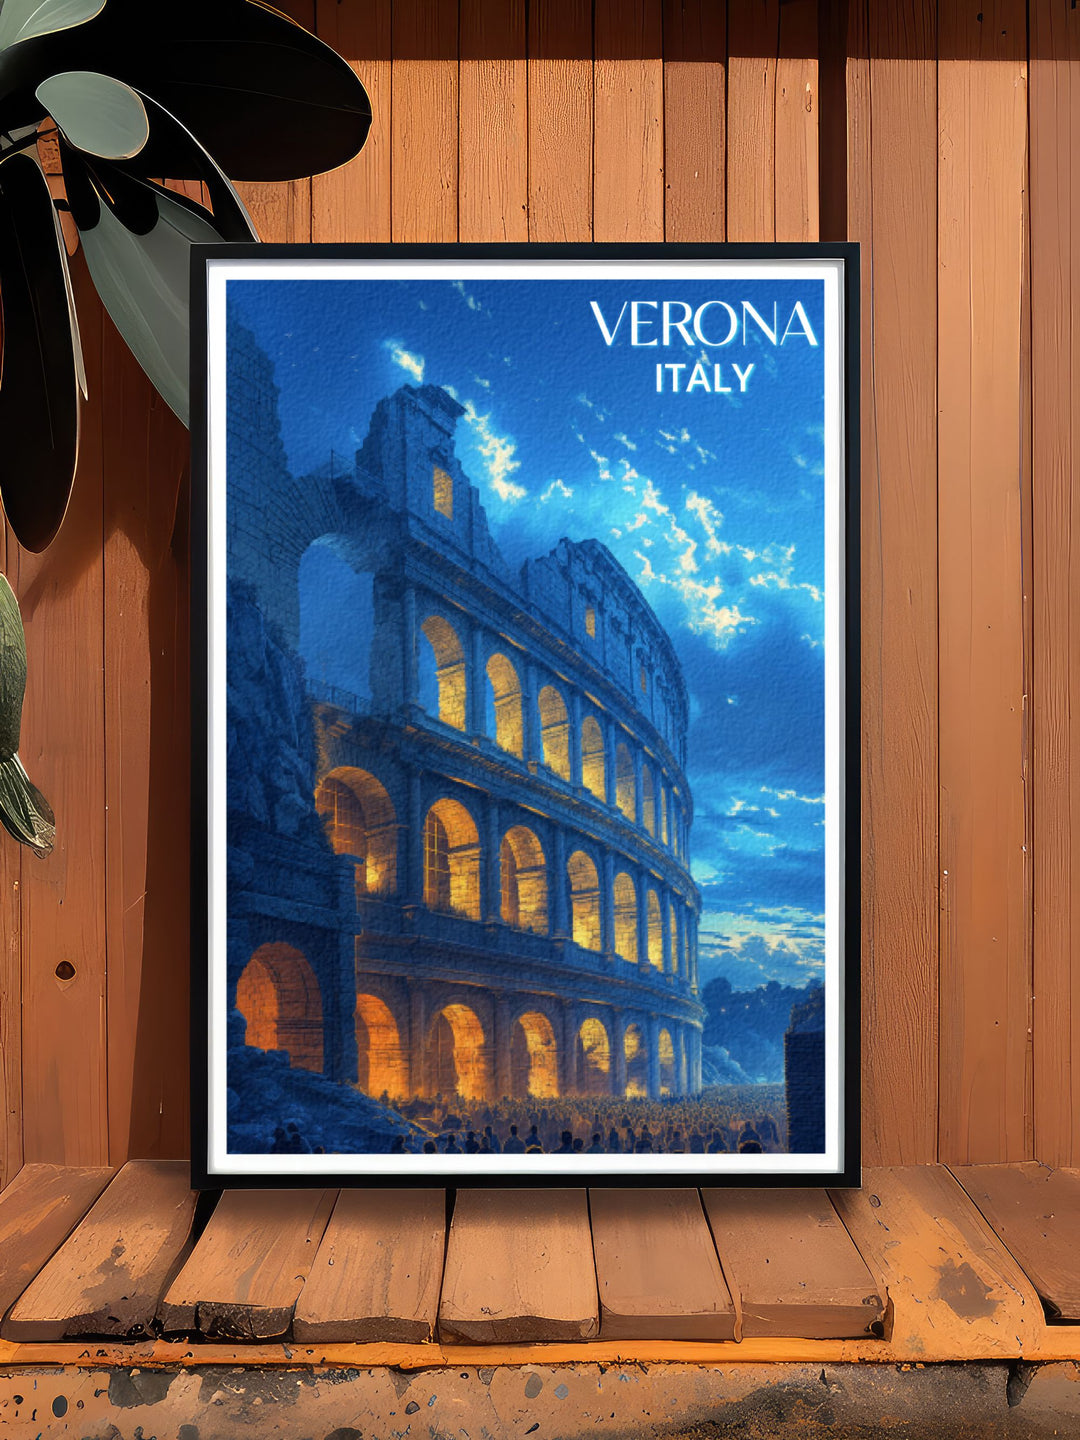 This custom print of the Verona Arena showcases the detailed stonework and iconic structure of the ancient Roman amphitheater. A personalized piece that adds a unique touch of Italian heritage and sophistication to any decor.